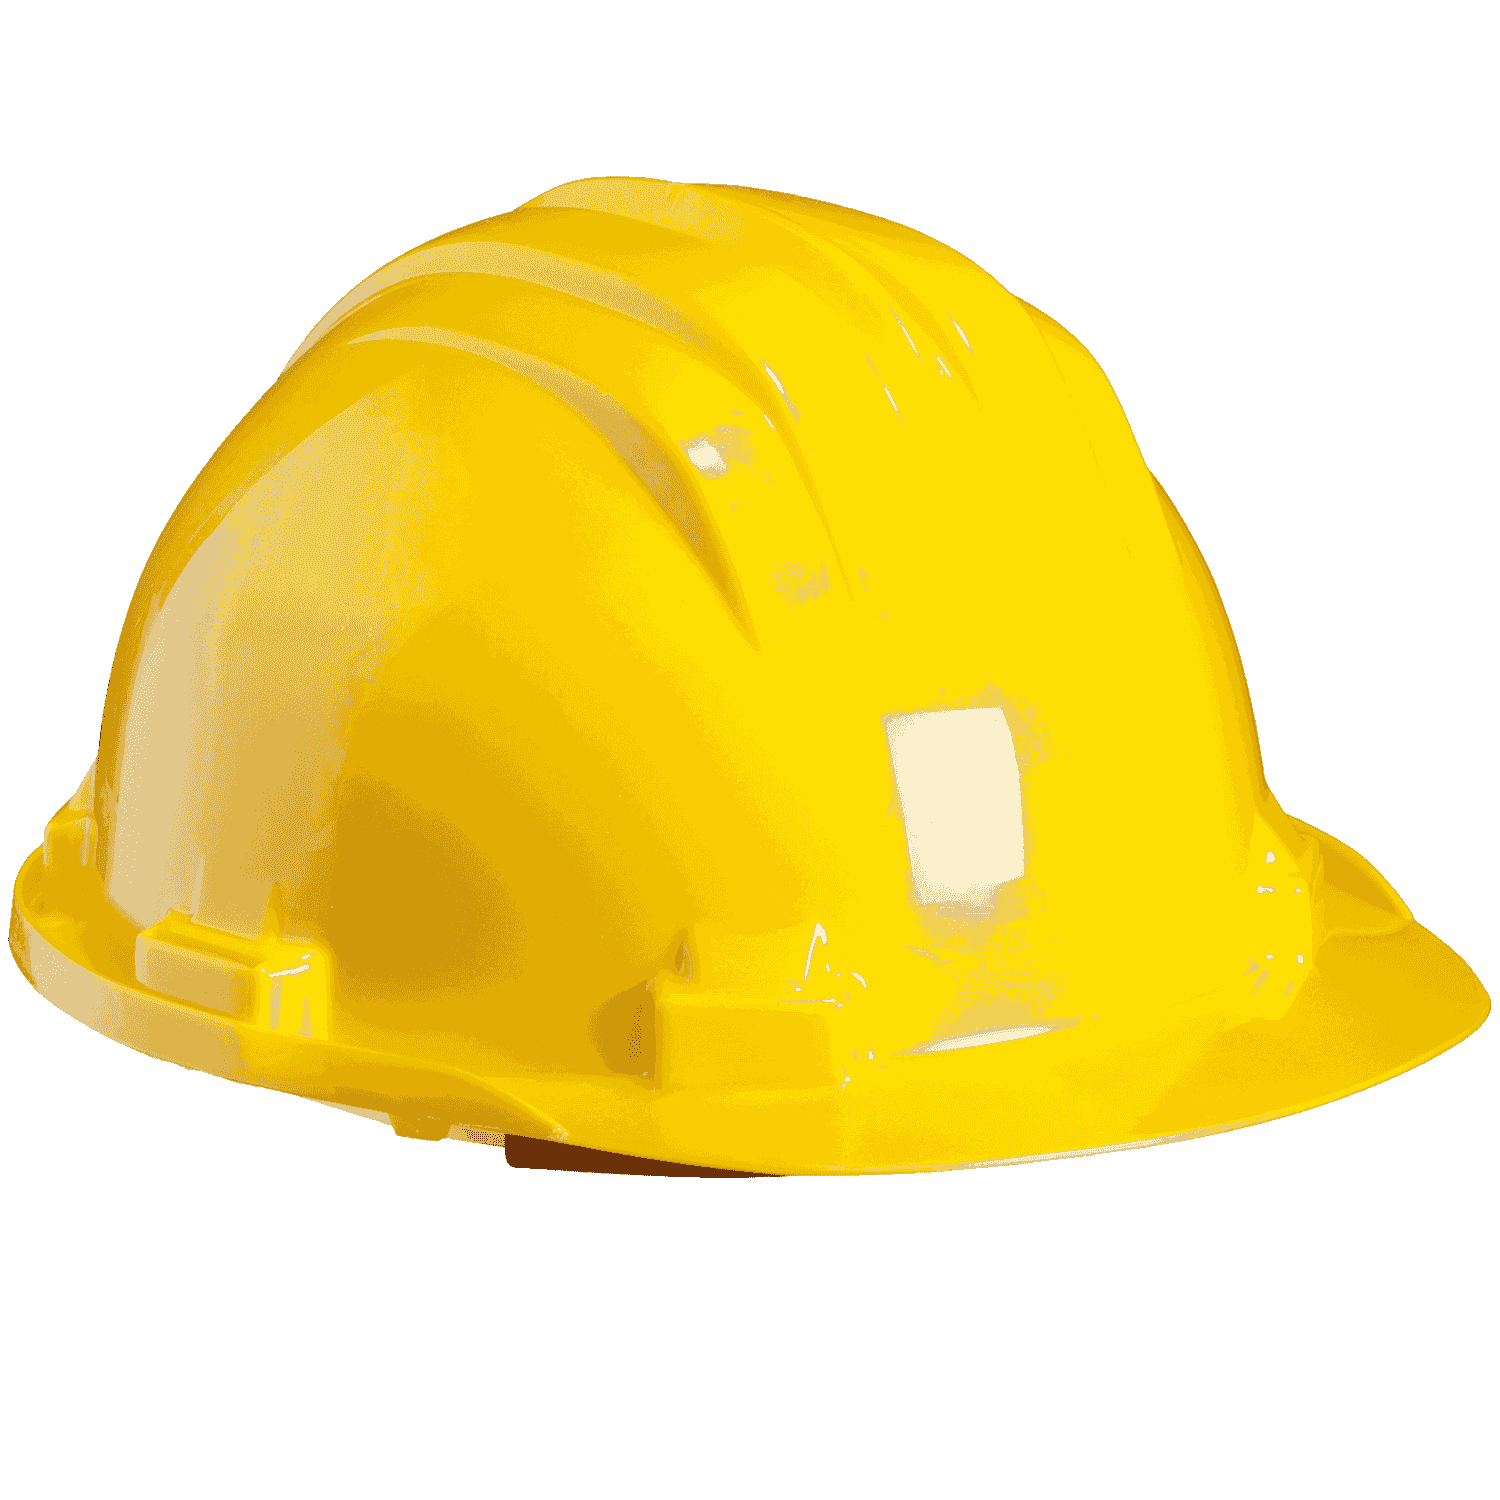 Climax 5-RS Manual Adjustment Safety Helmet Yellow